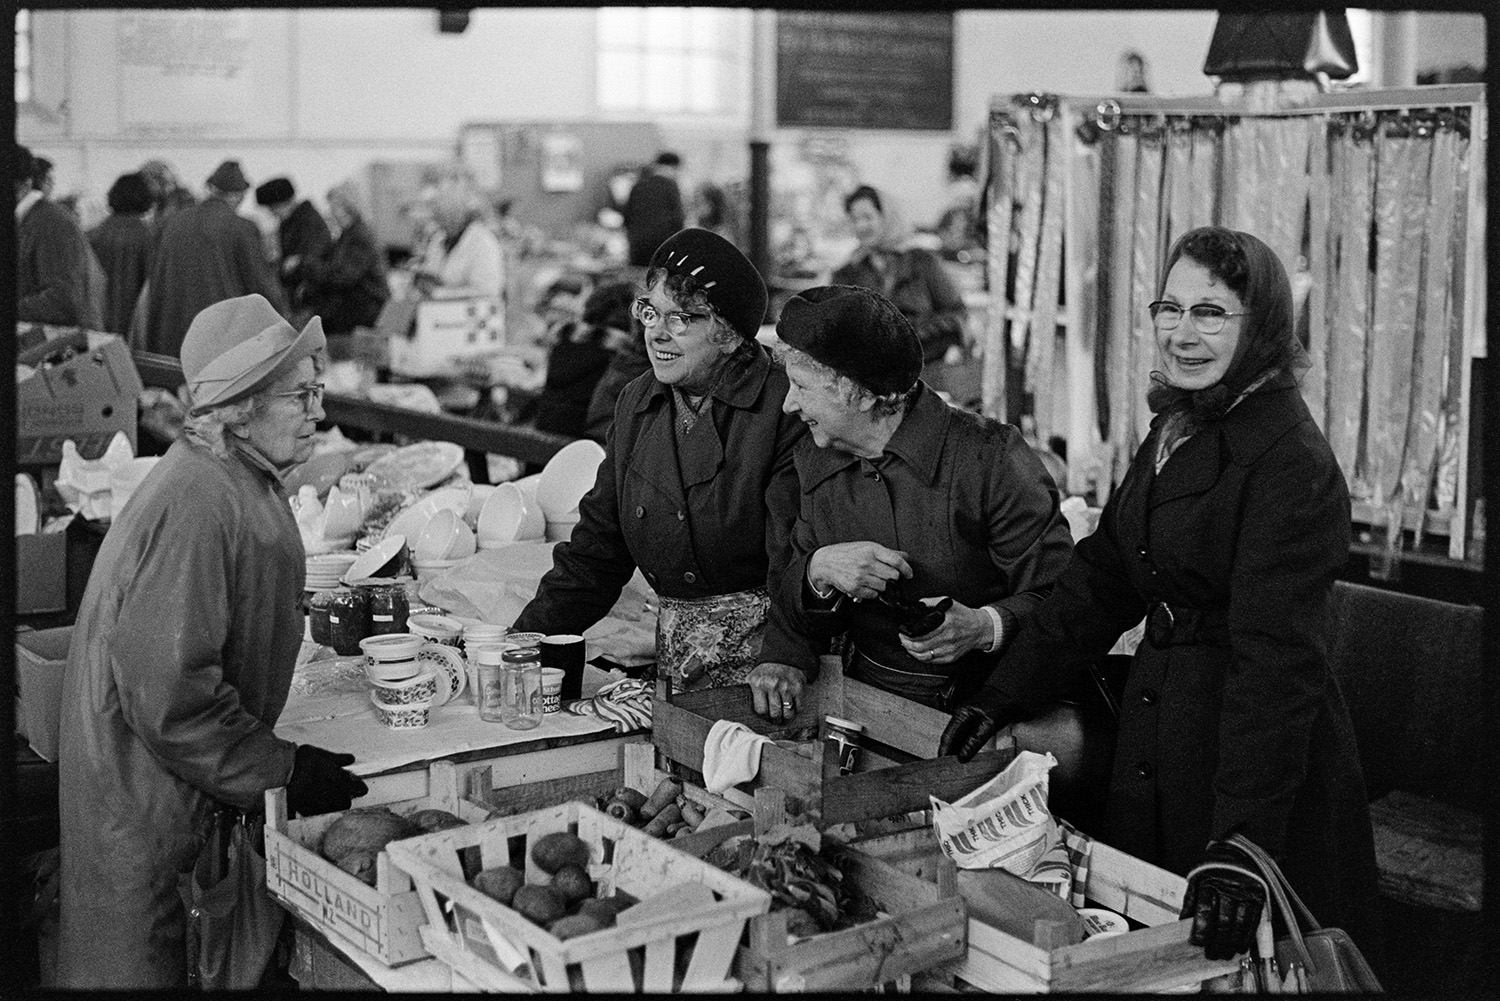 Pannier market stalls and women stallholders, books, vegetables. 
[A market trader and customers talking over a vegetable stall at Bideford Pannier Market.]